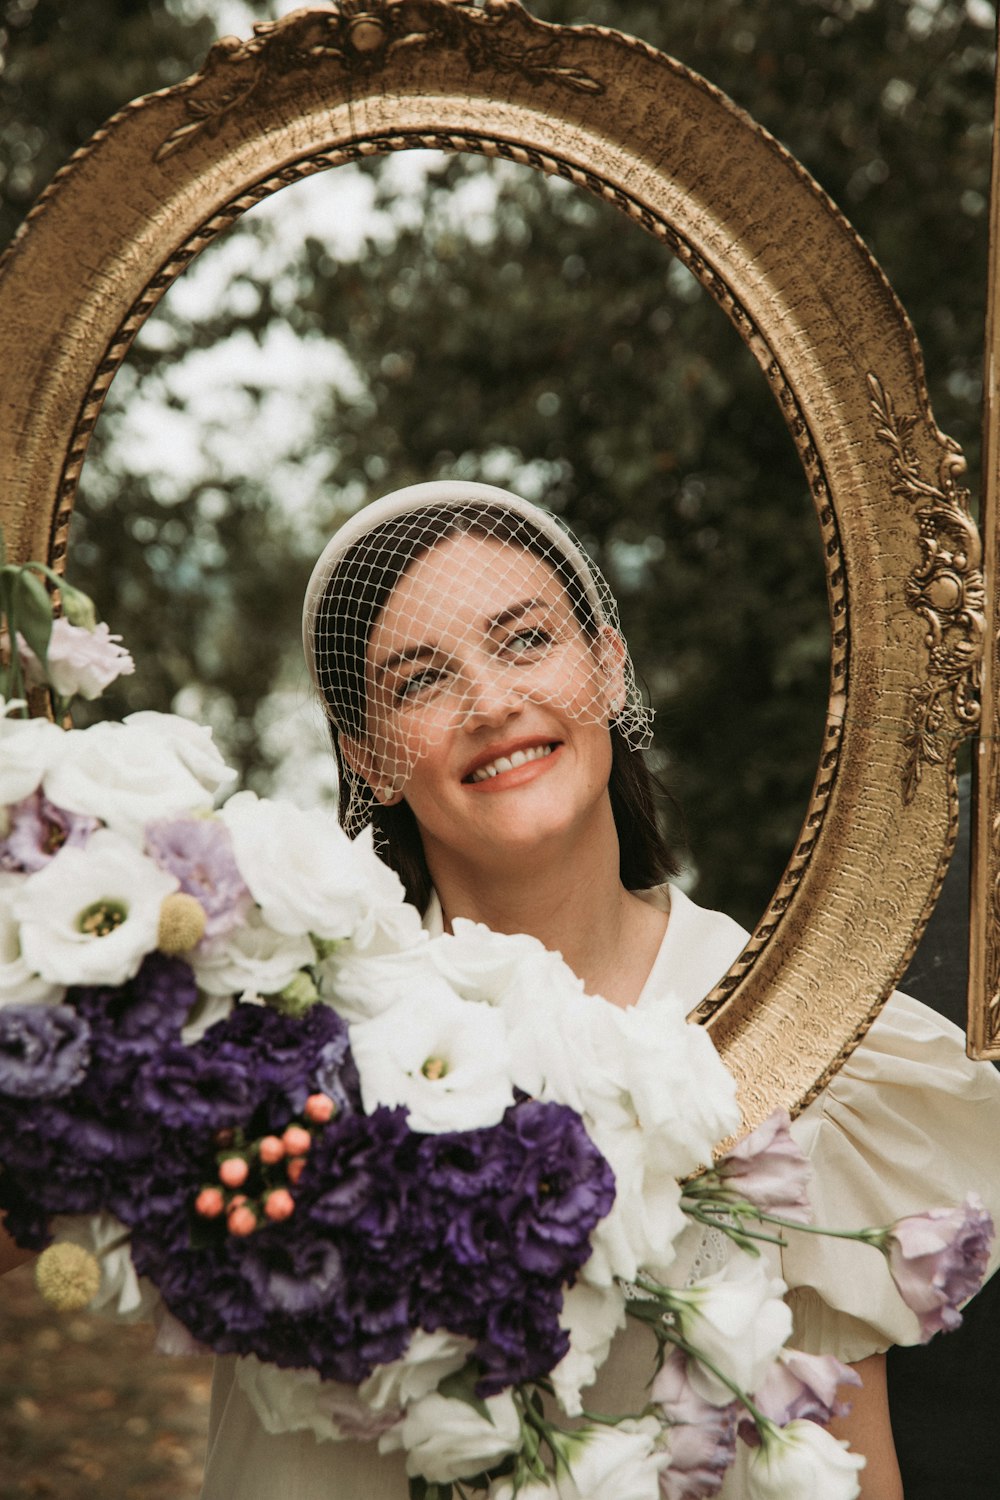 a woman holding a bouquet of flowers in front of a mirror